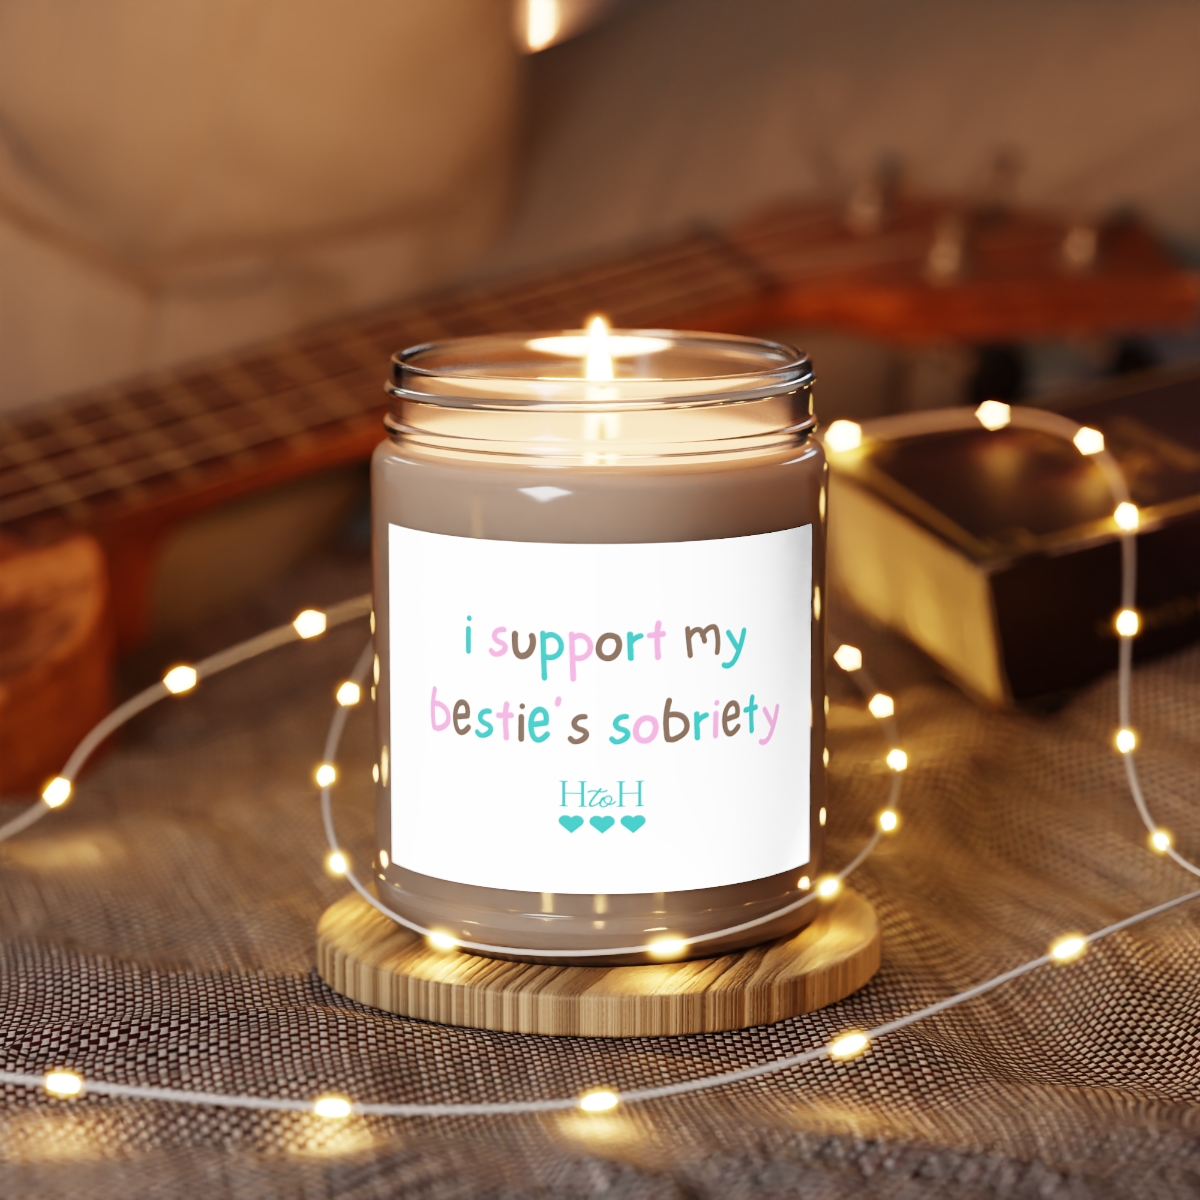 Bestie's Sobriety - Scented Candles, 9oz product thumbnail image